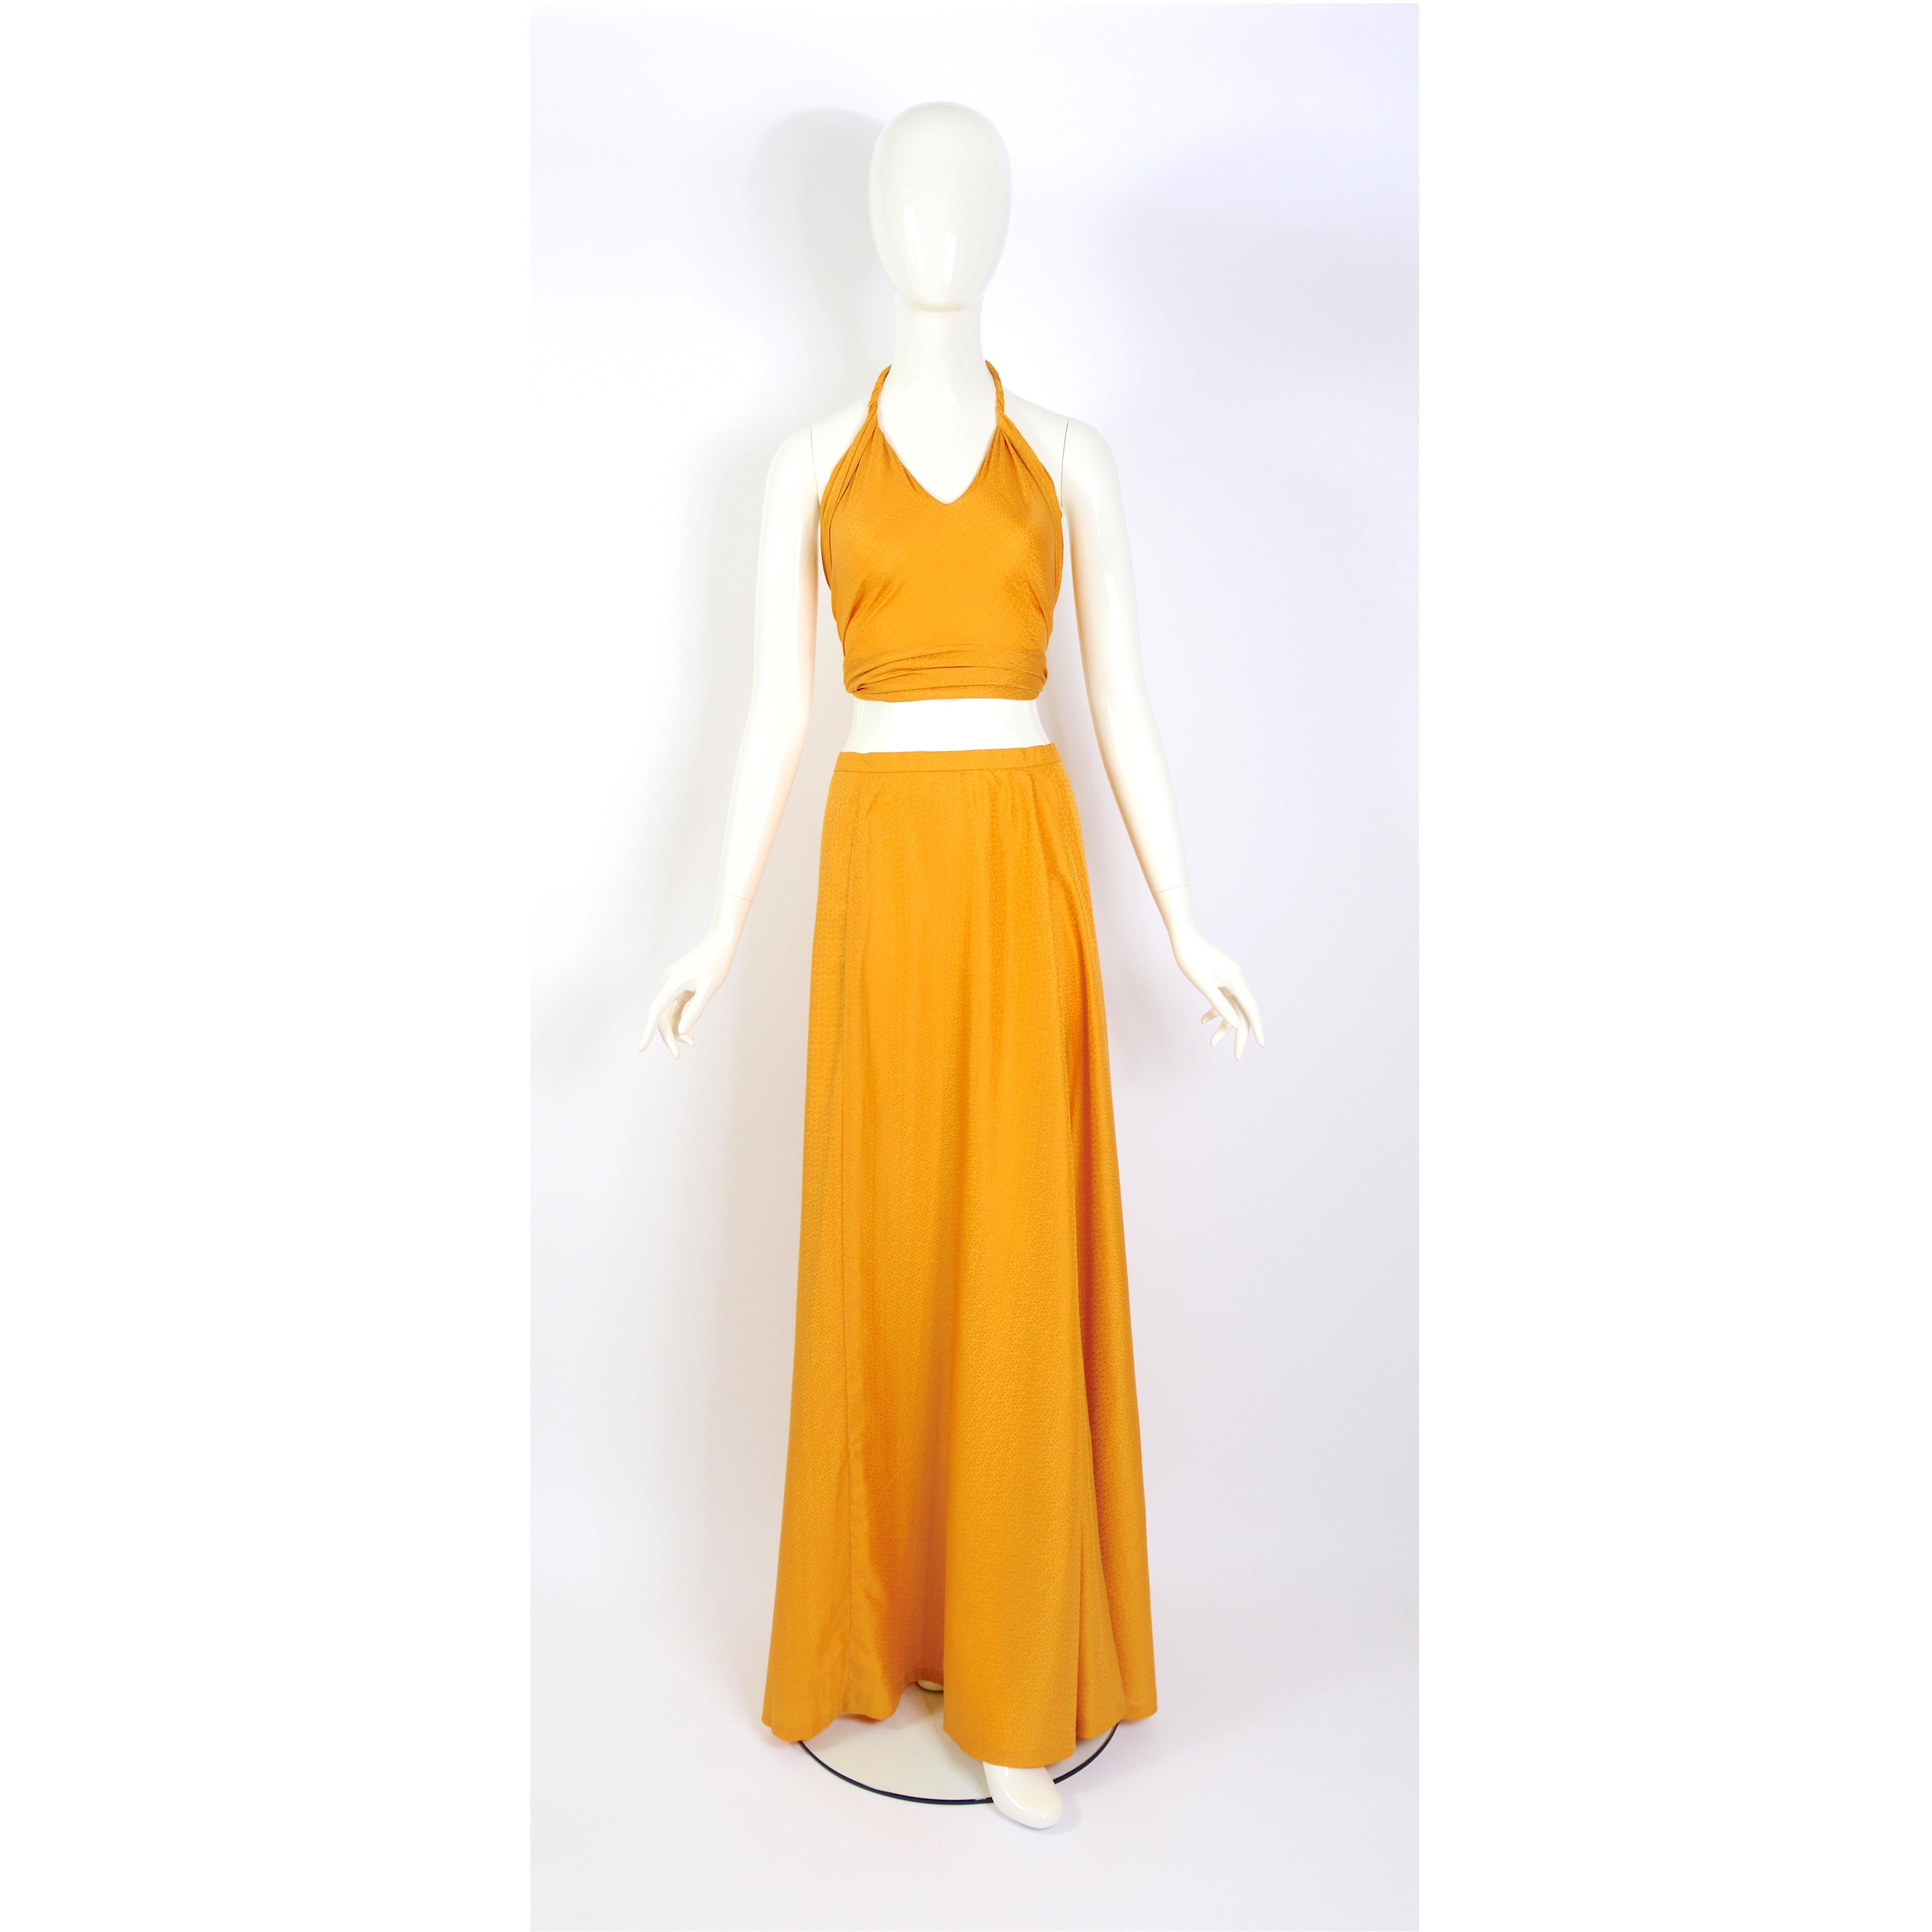 Madame Grès who demanded the finest quality and attention to detail had to take the step toward ready-to-wear clothing in the 1970s.....
Unworn with Tag - Stunning 1970s Boutique Grès by Madame Grès (Alix Barton) gold scarf 100% silk halter top &